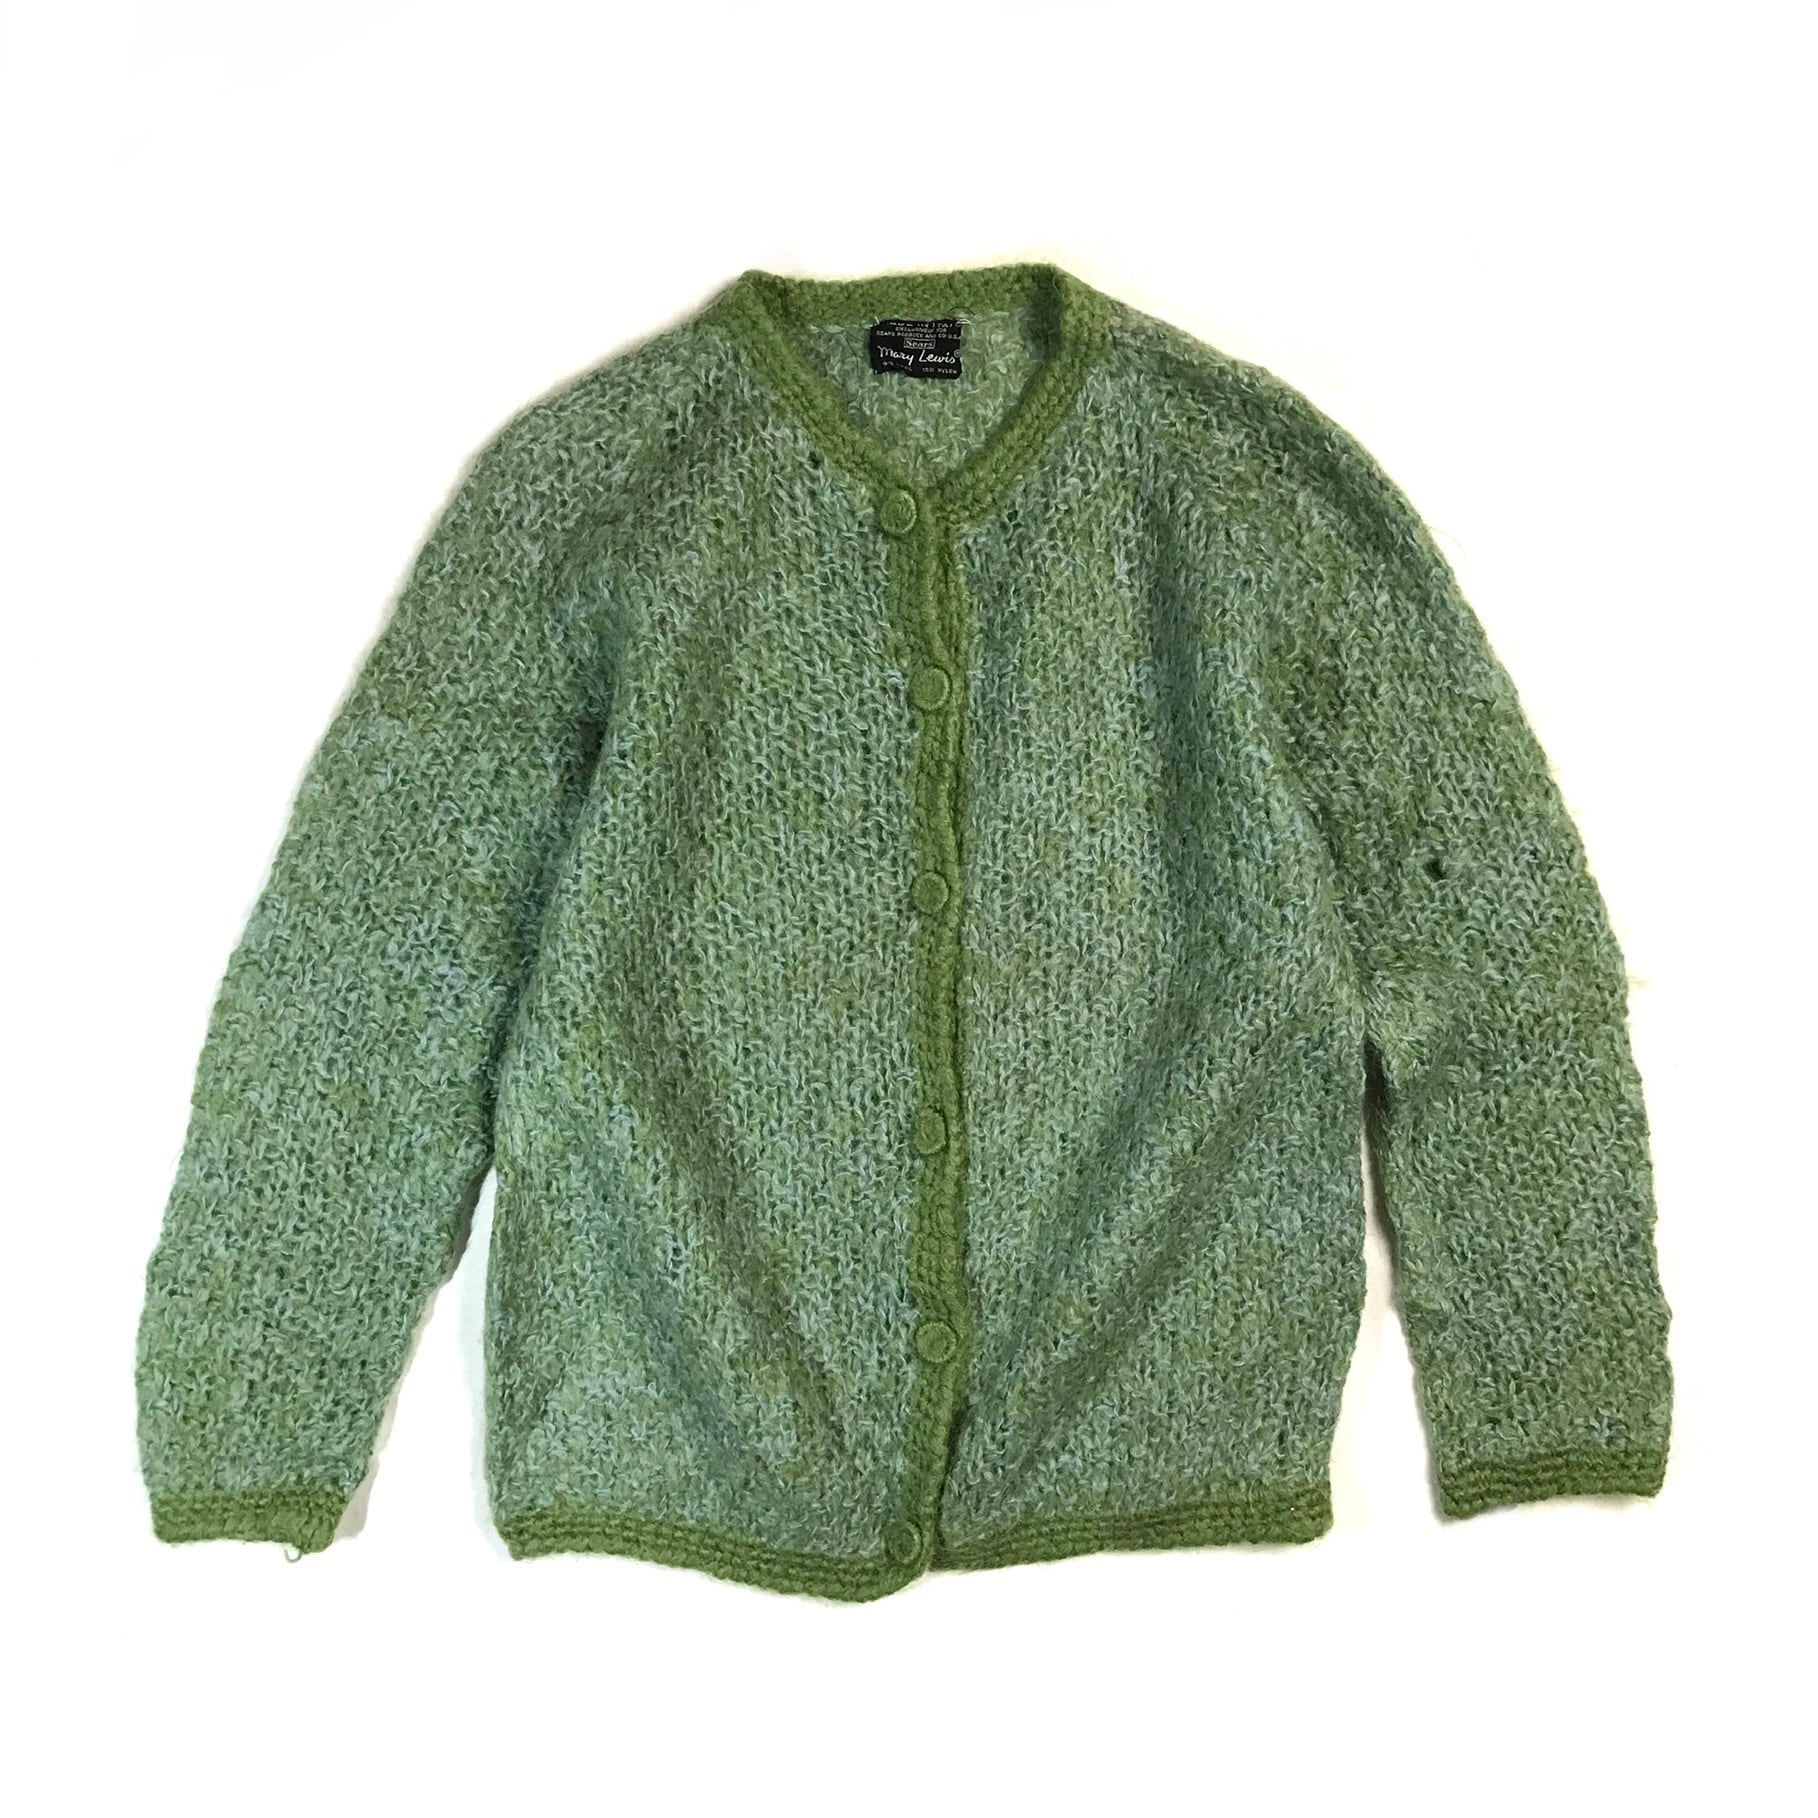 Sears vintage wool knit green | ハイカラ倉庫 powered by BASE